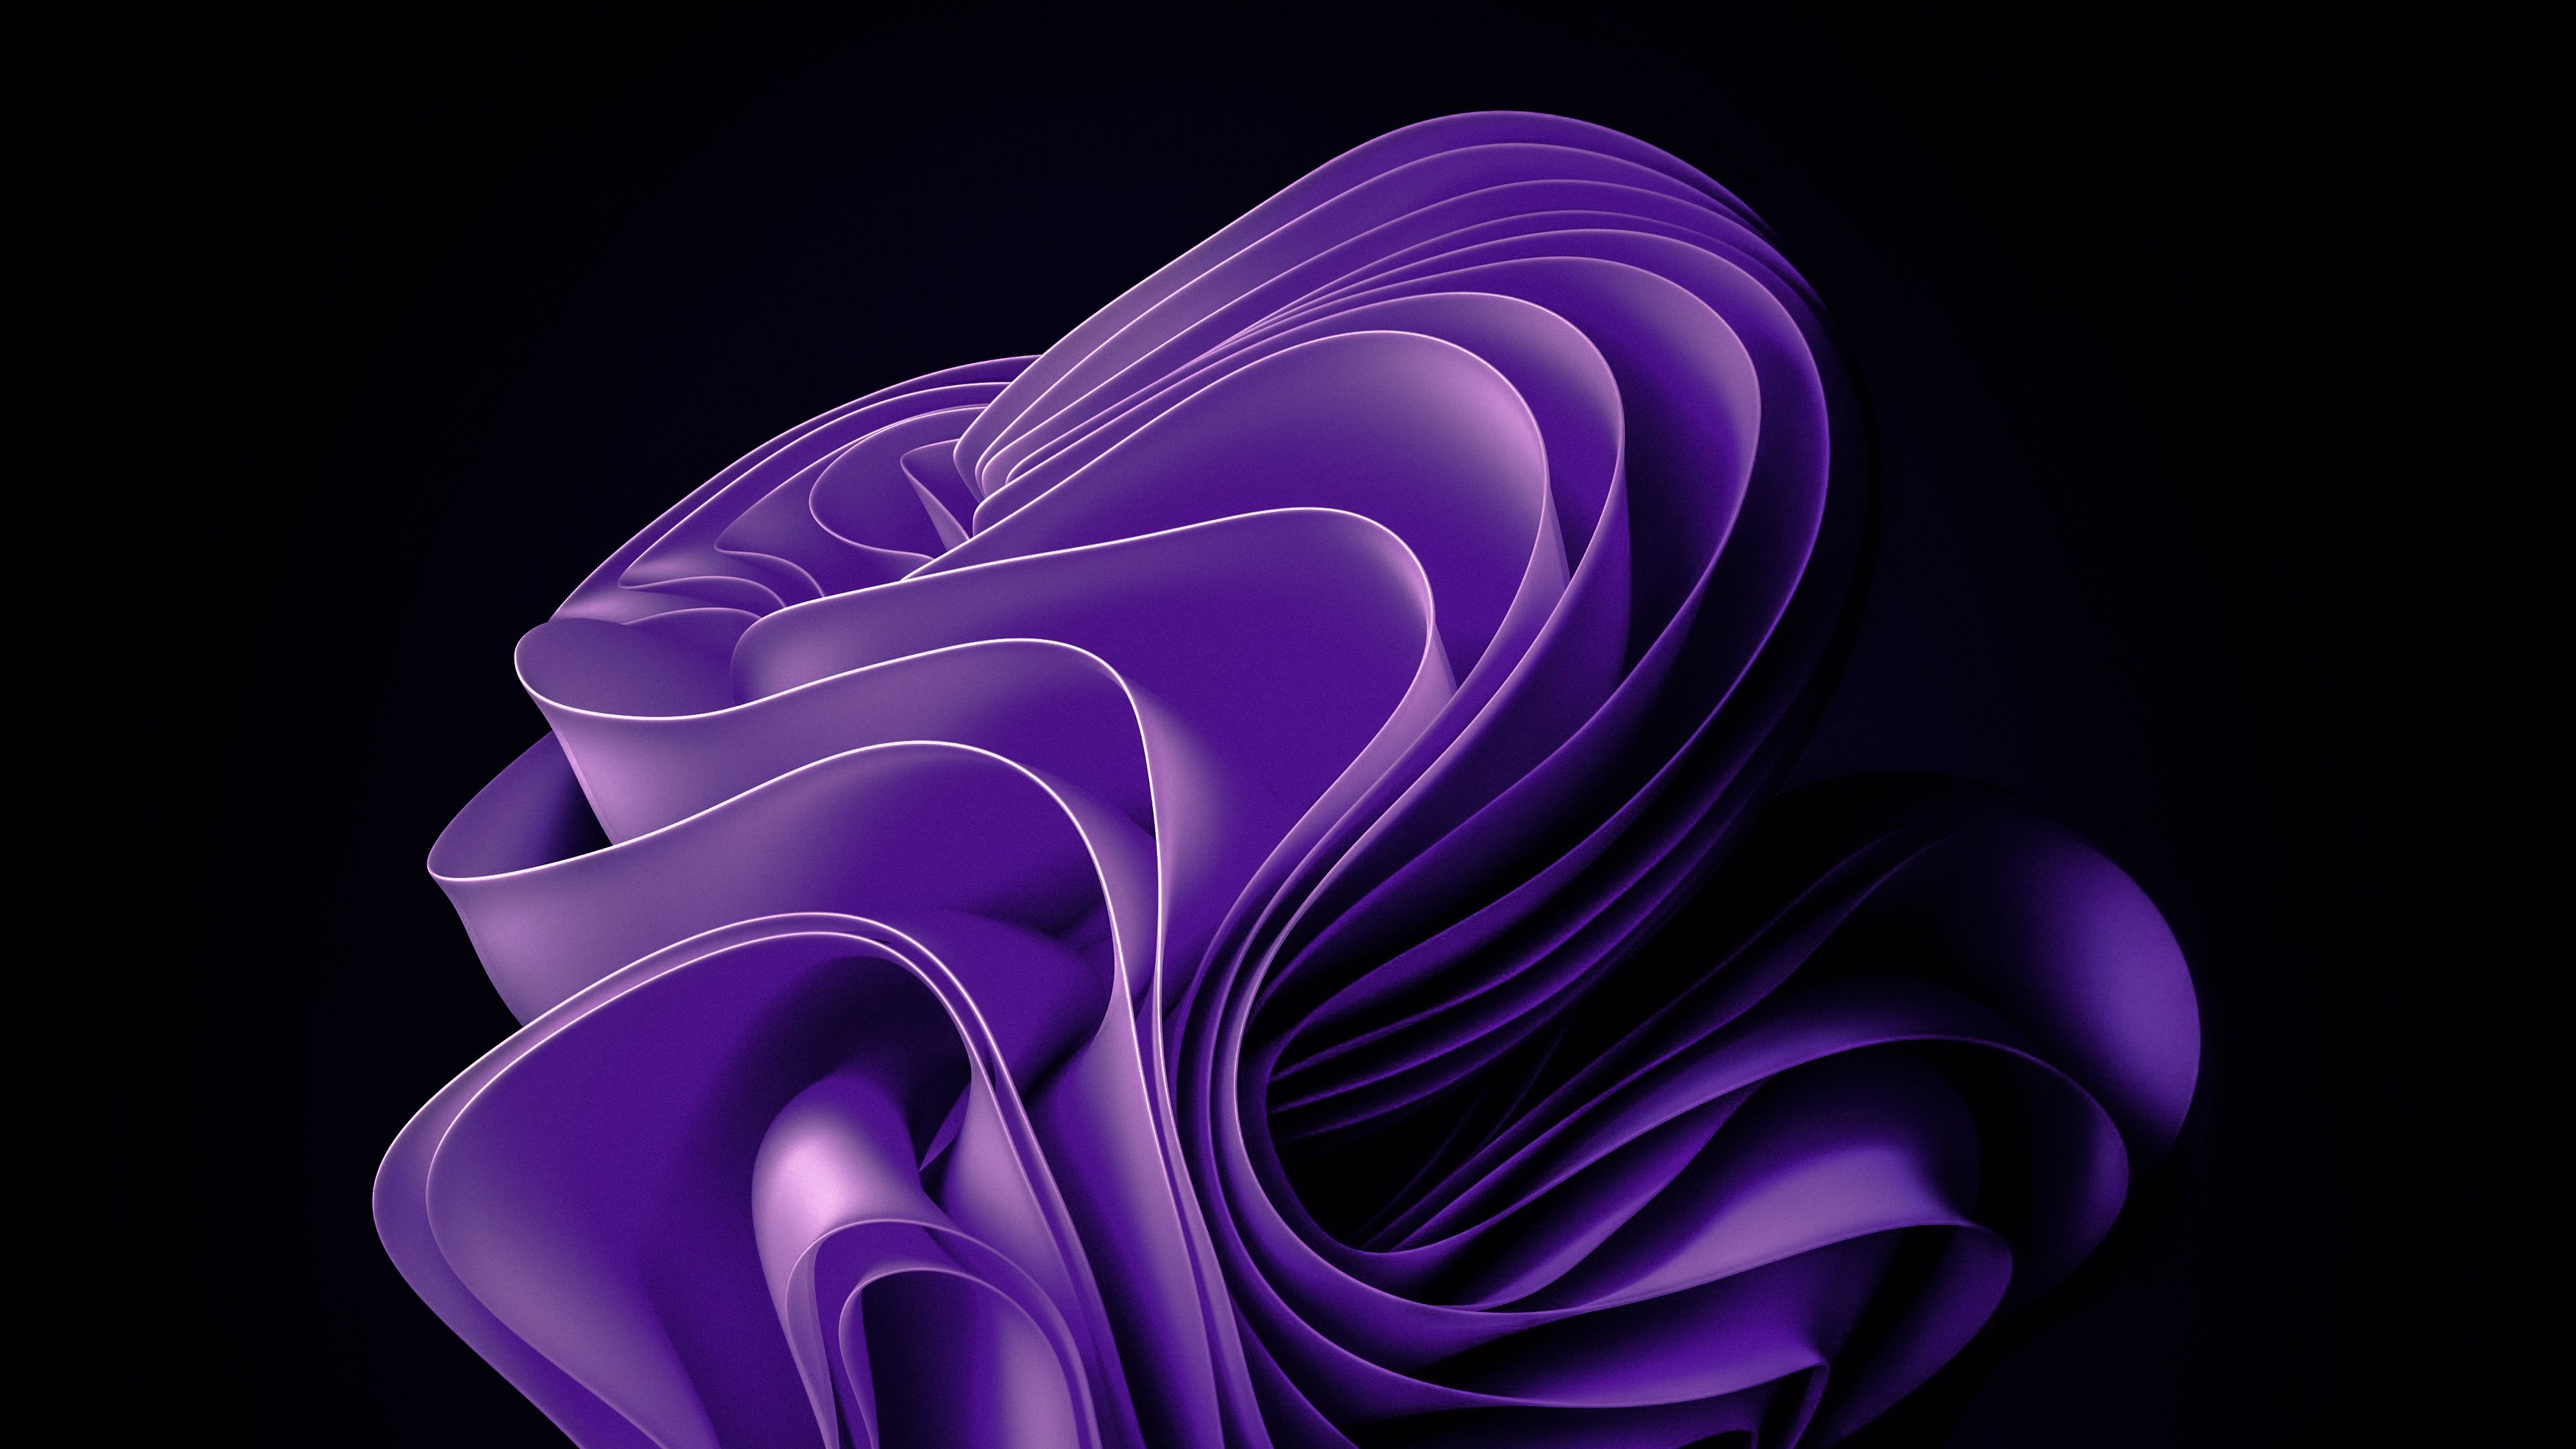 A purple abstract 3D wave on a black background - Windows 11